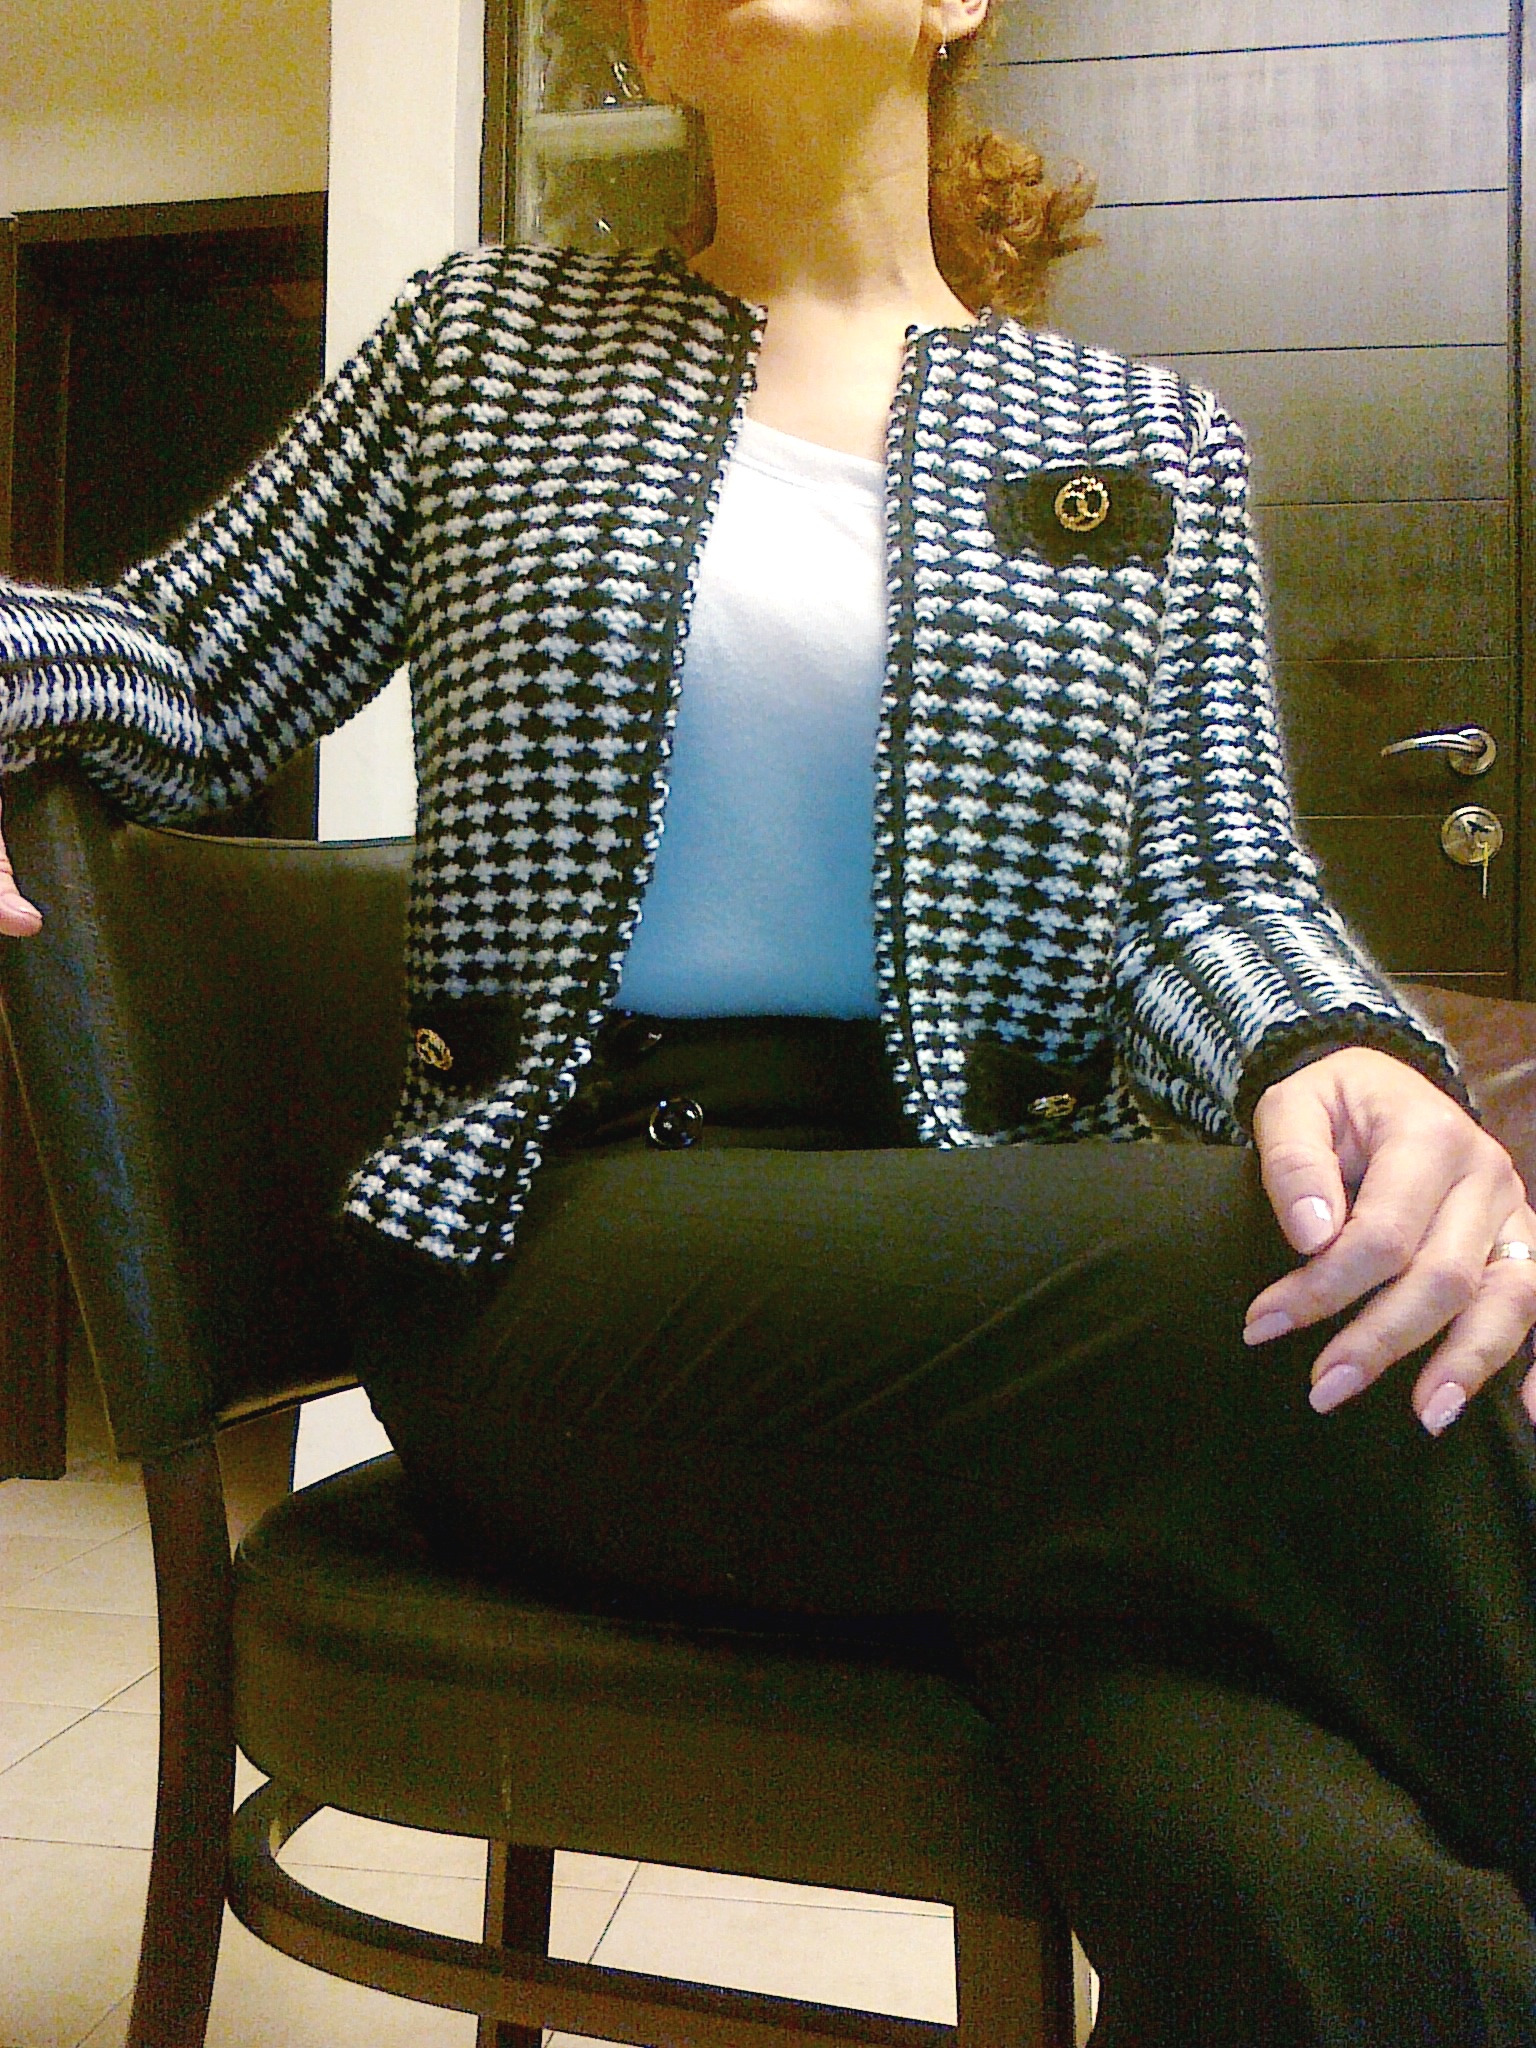 My own knit "Chanel" Jacket Sewing Projects